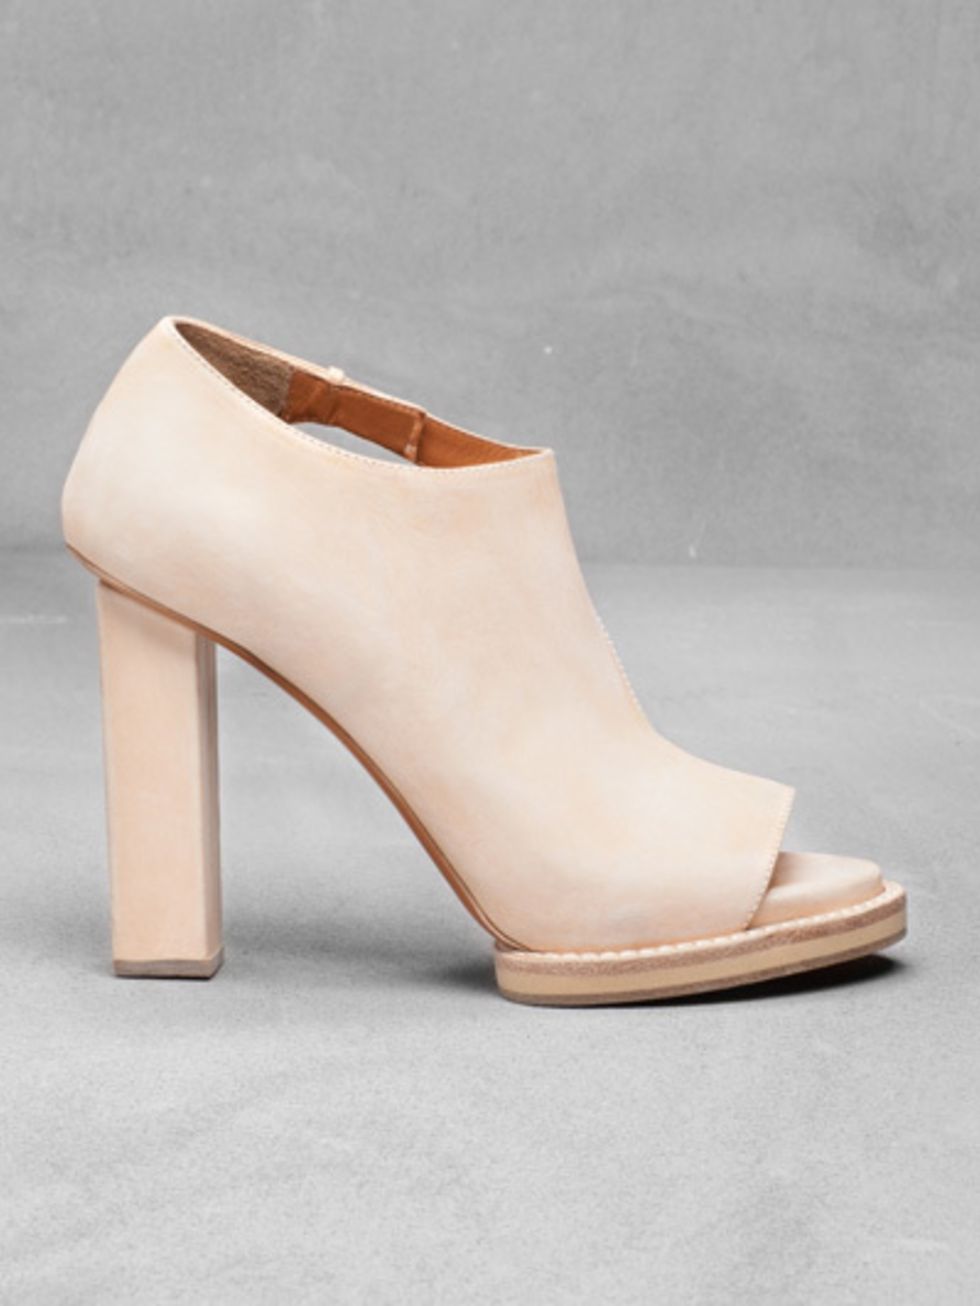 Footwear, Brown, High heels, Tan, Fashion, Beauty, Beige, Leather, Material property, Fawn, 